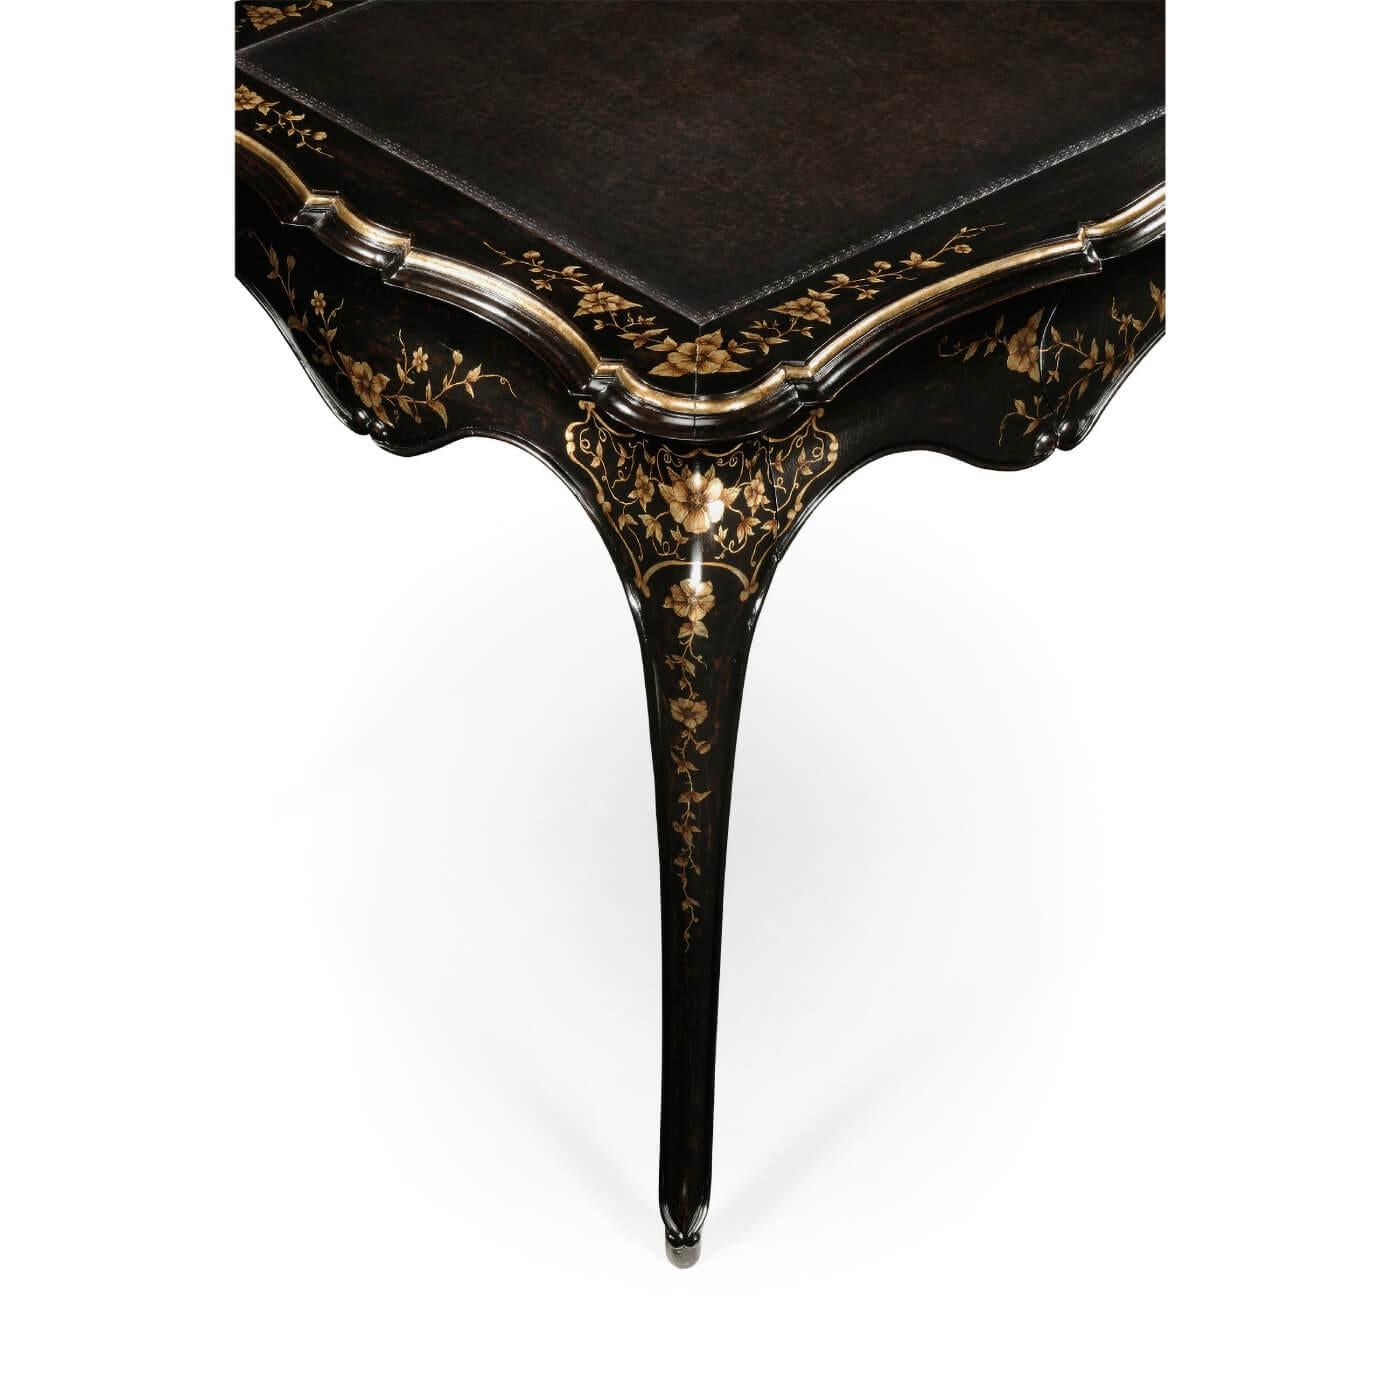 Wood English Rococo Painted Desk